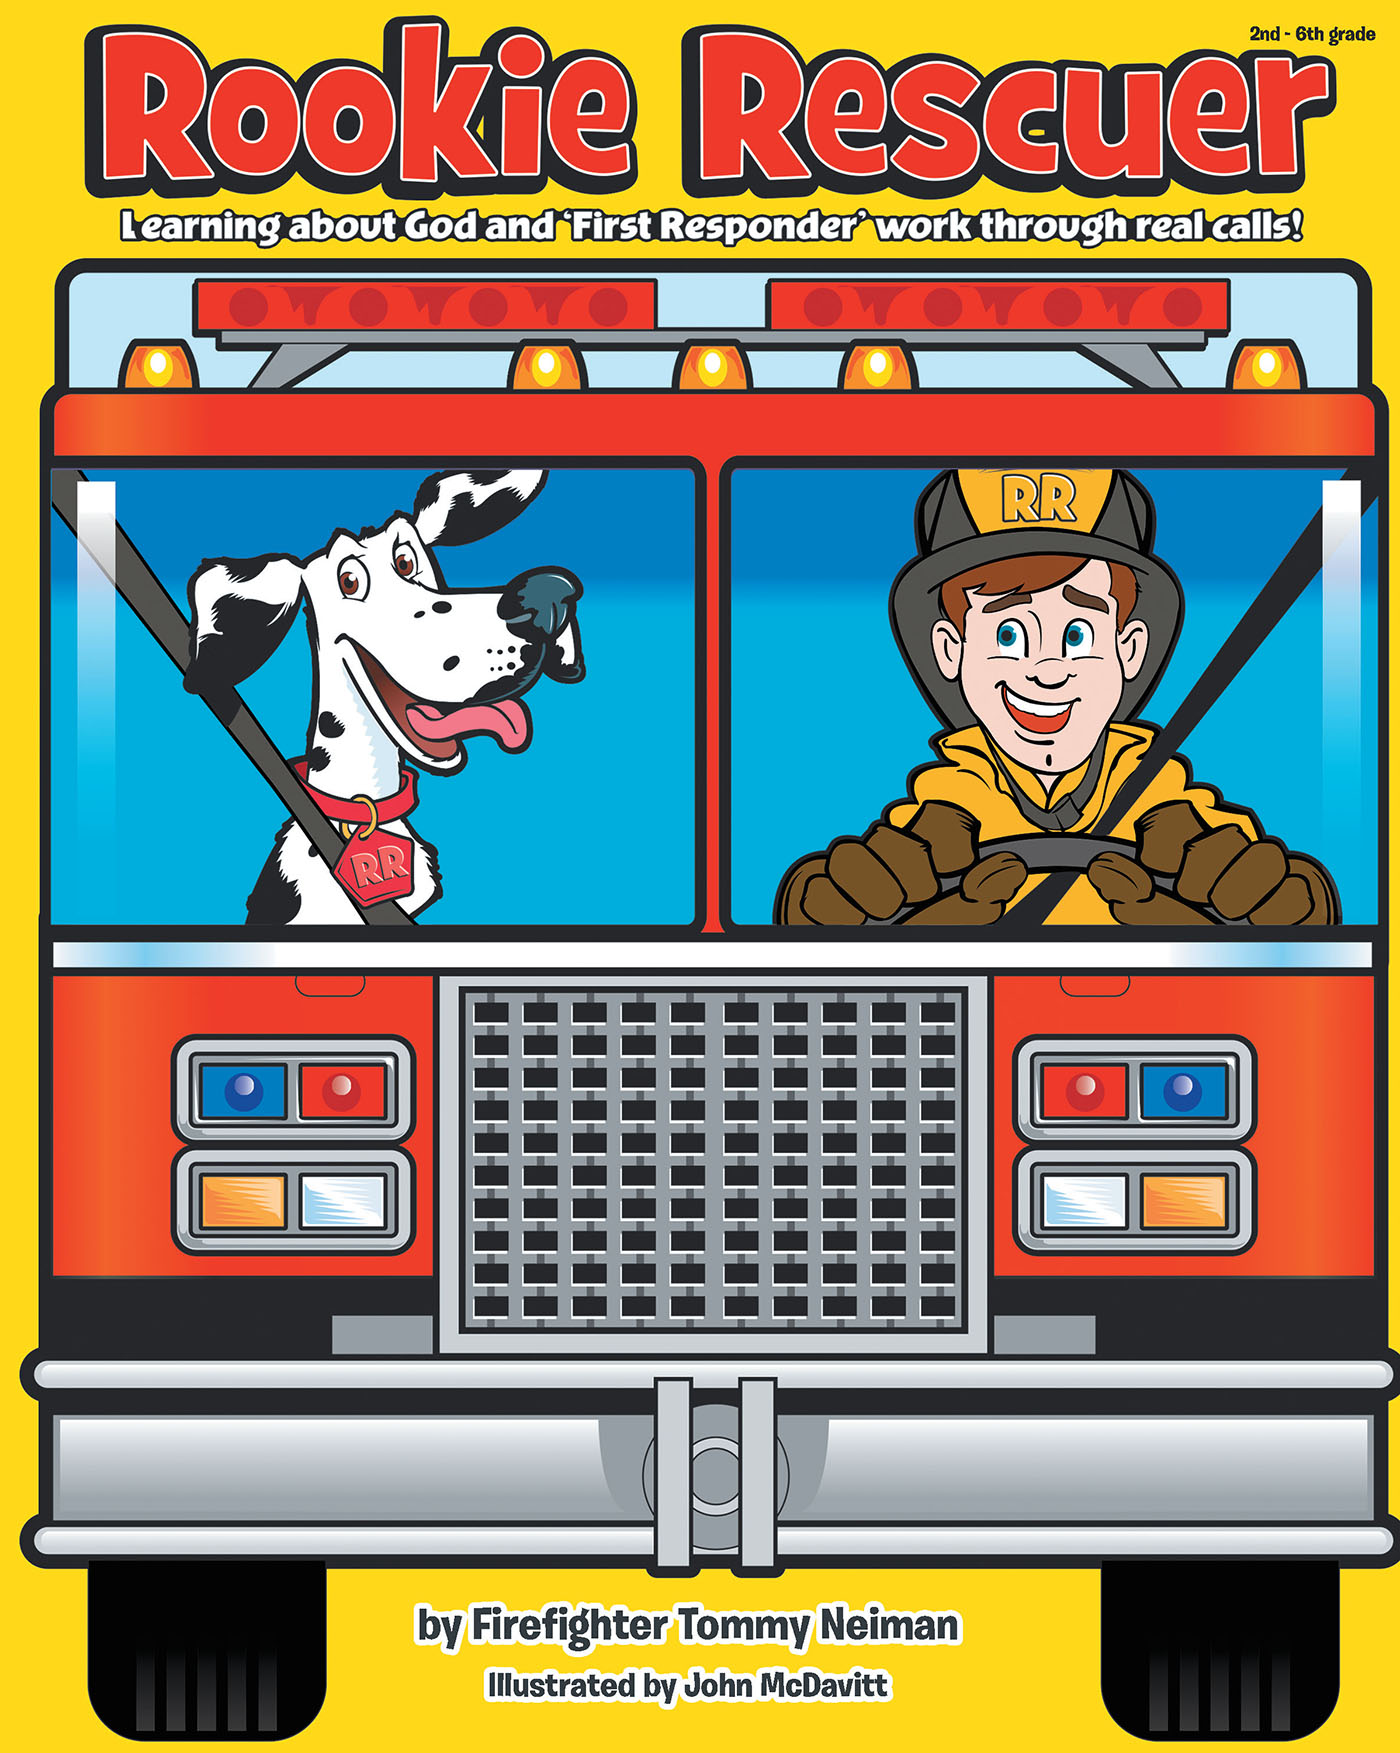 Author Tommy Neiman’s New Children’s Workbook, "Rookie Rescuer," Explores Real-World Emergency Calls and Important Information Needed to Become a Rookie First Responder